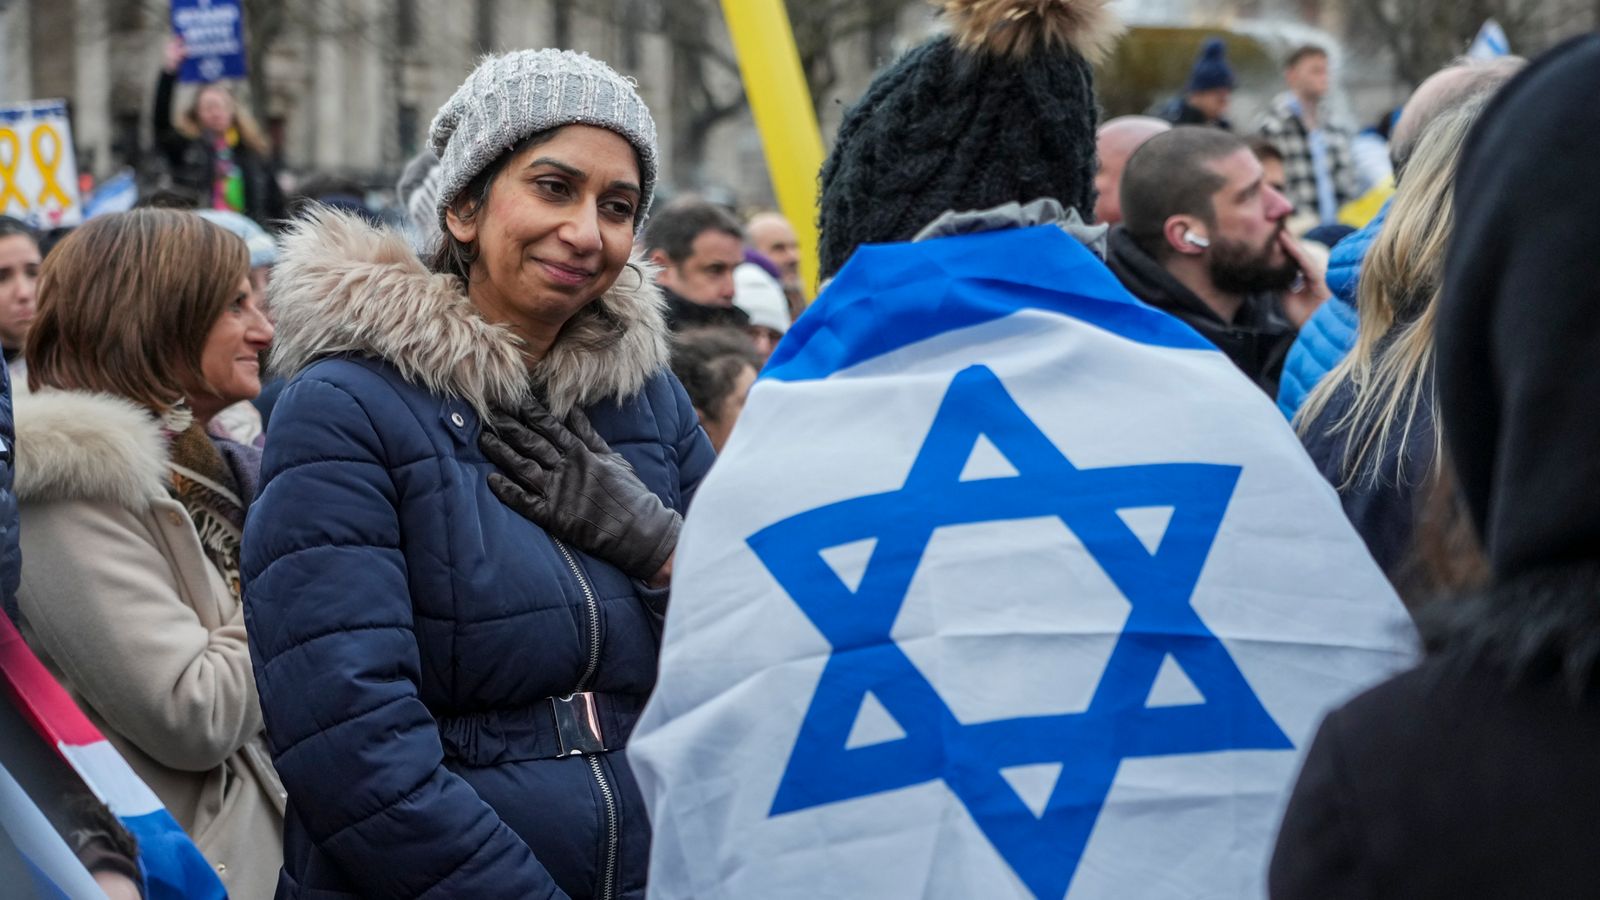 Middle East crisis: Former home secretary Suella Braverman joins pro-Israel rally